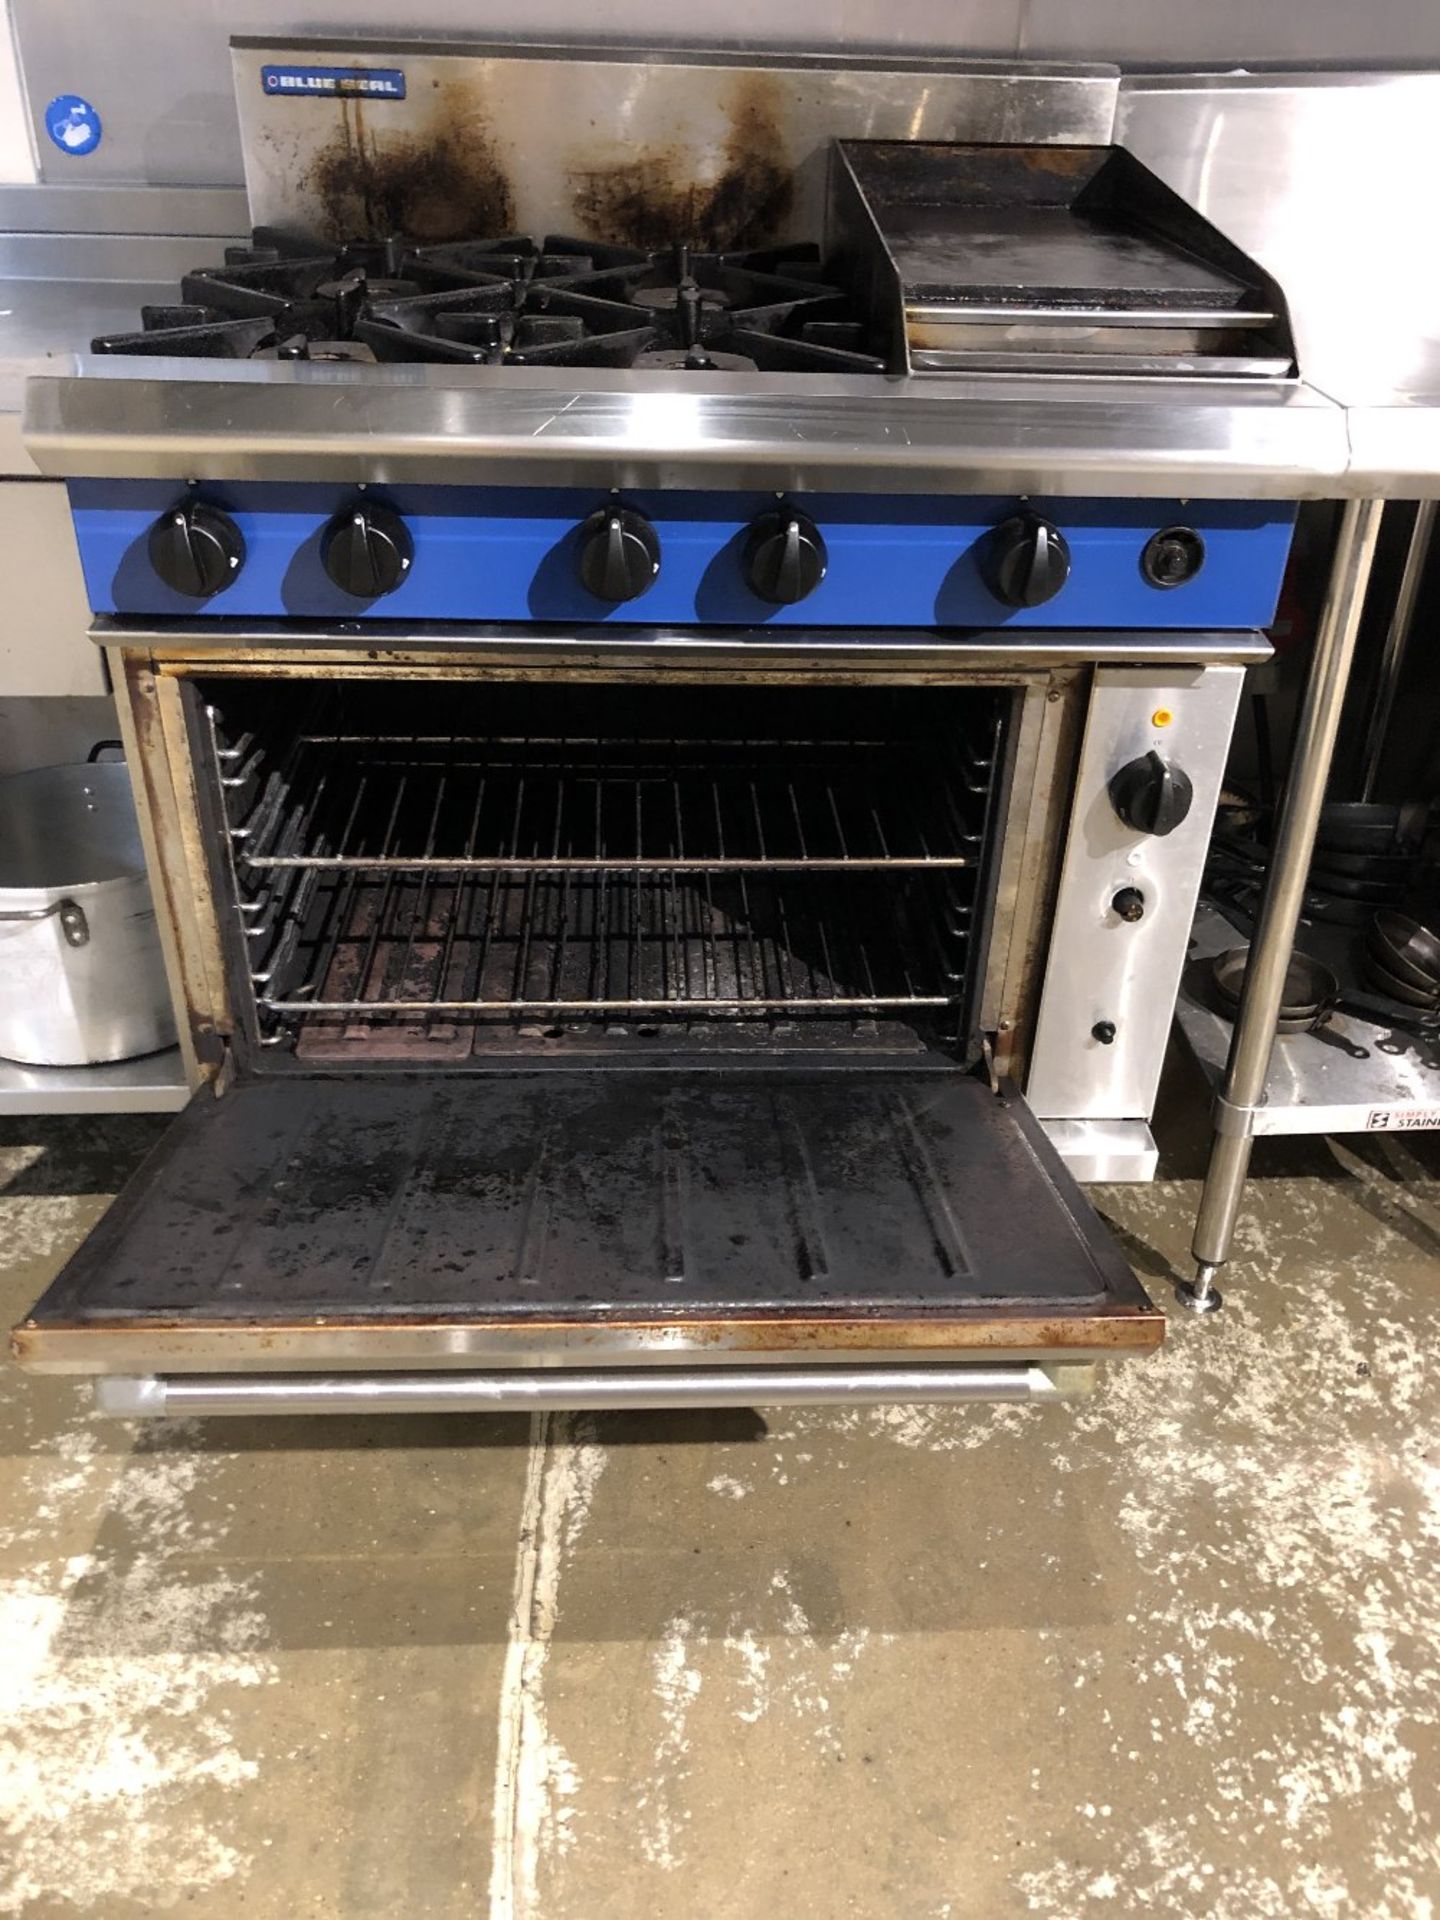 Blue Seal G56CF Stainless Steel Four Burner Range Oven With 300mm Smooth Griddle - Image 2 of 4